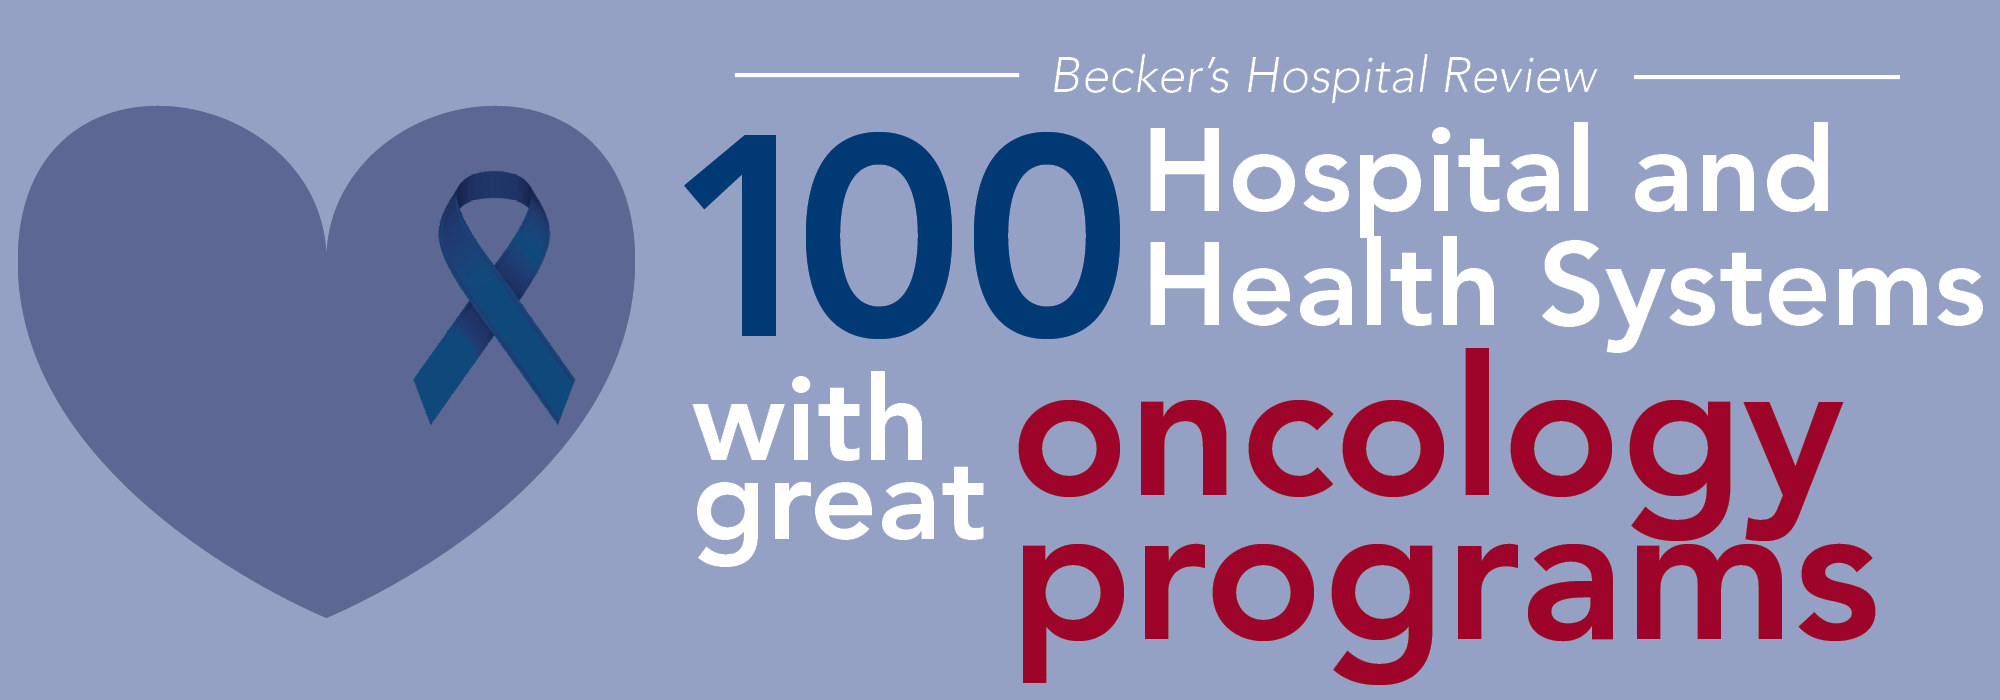 100 Hospital and health systems with great oncology programs